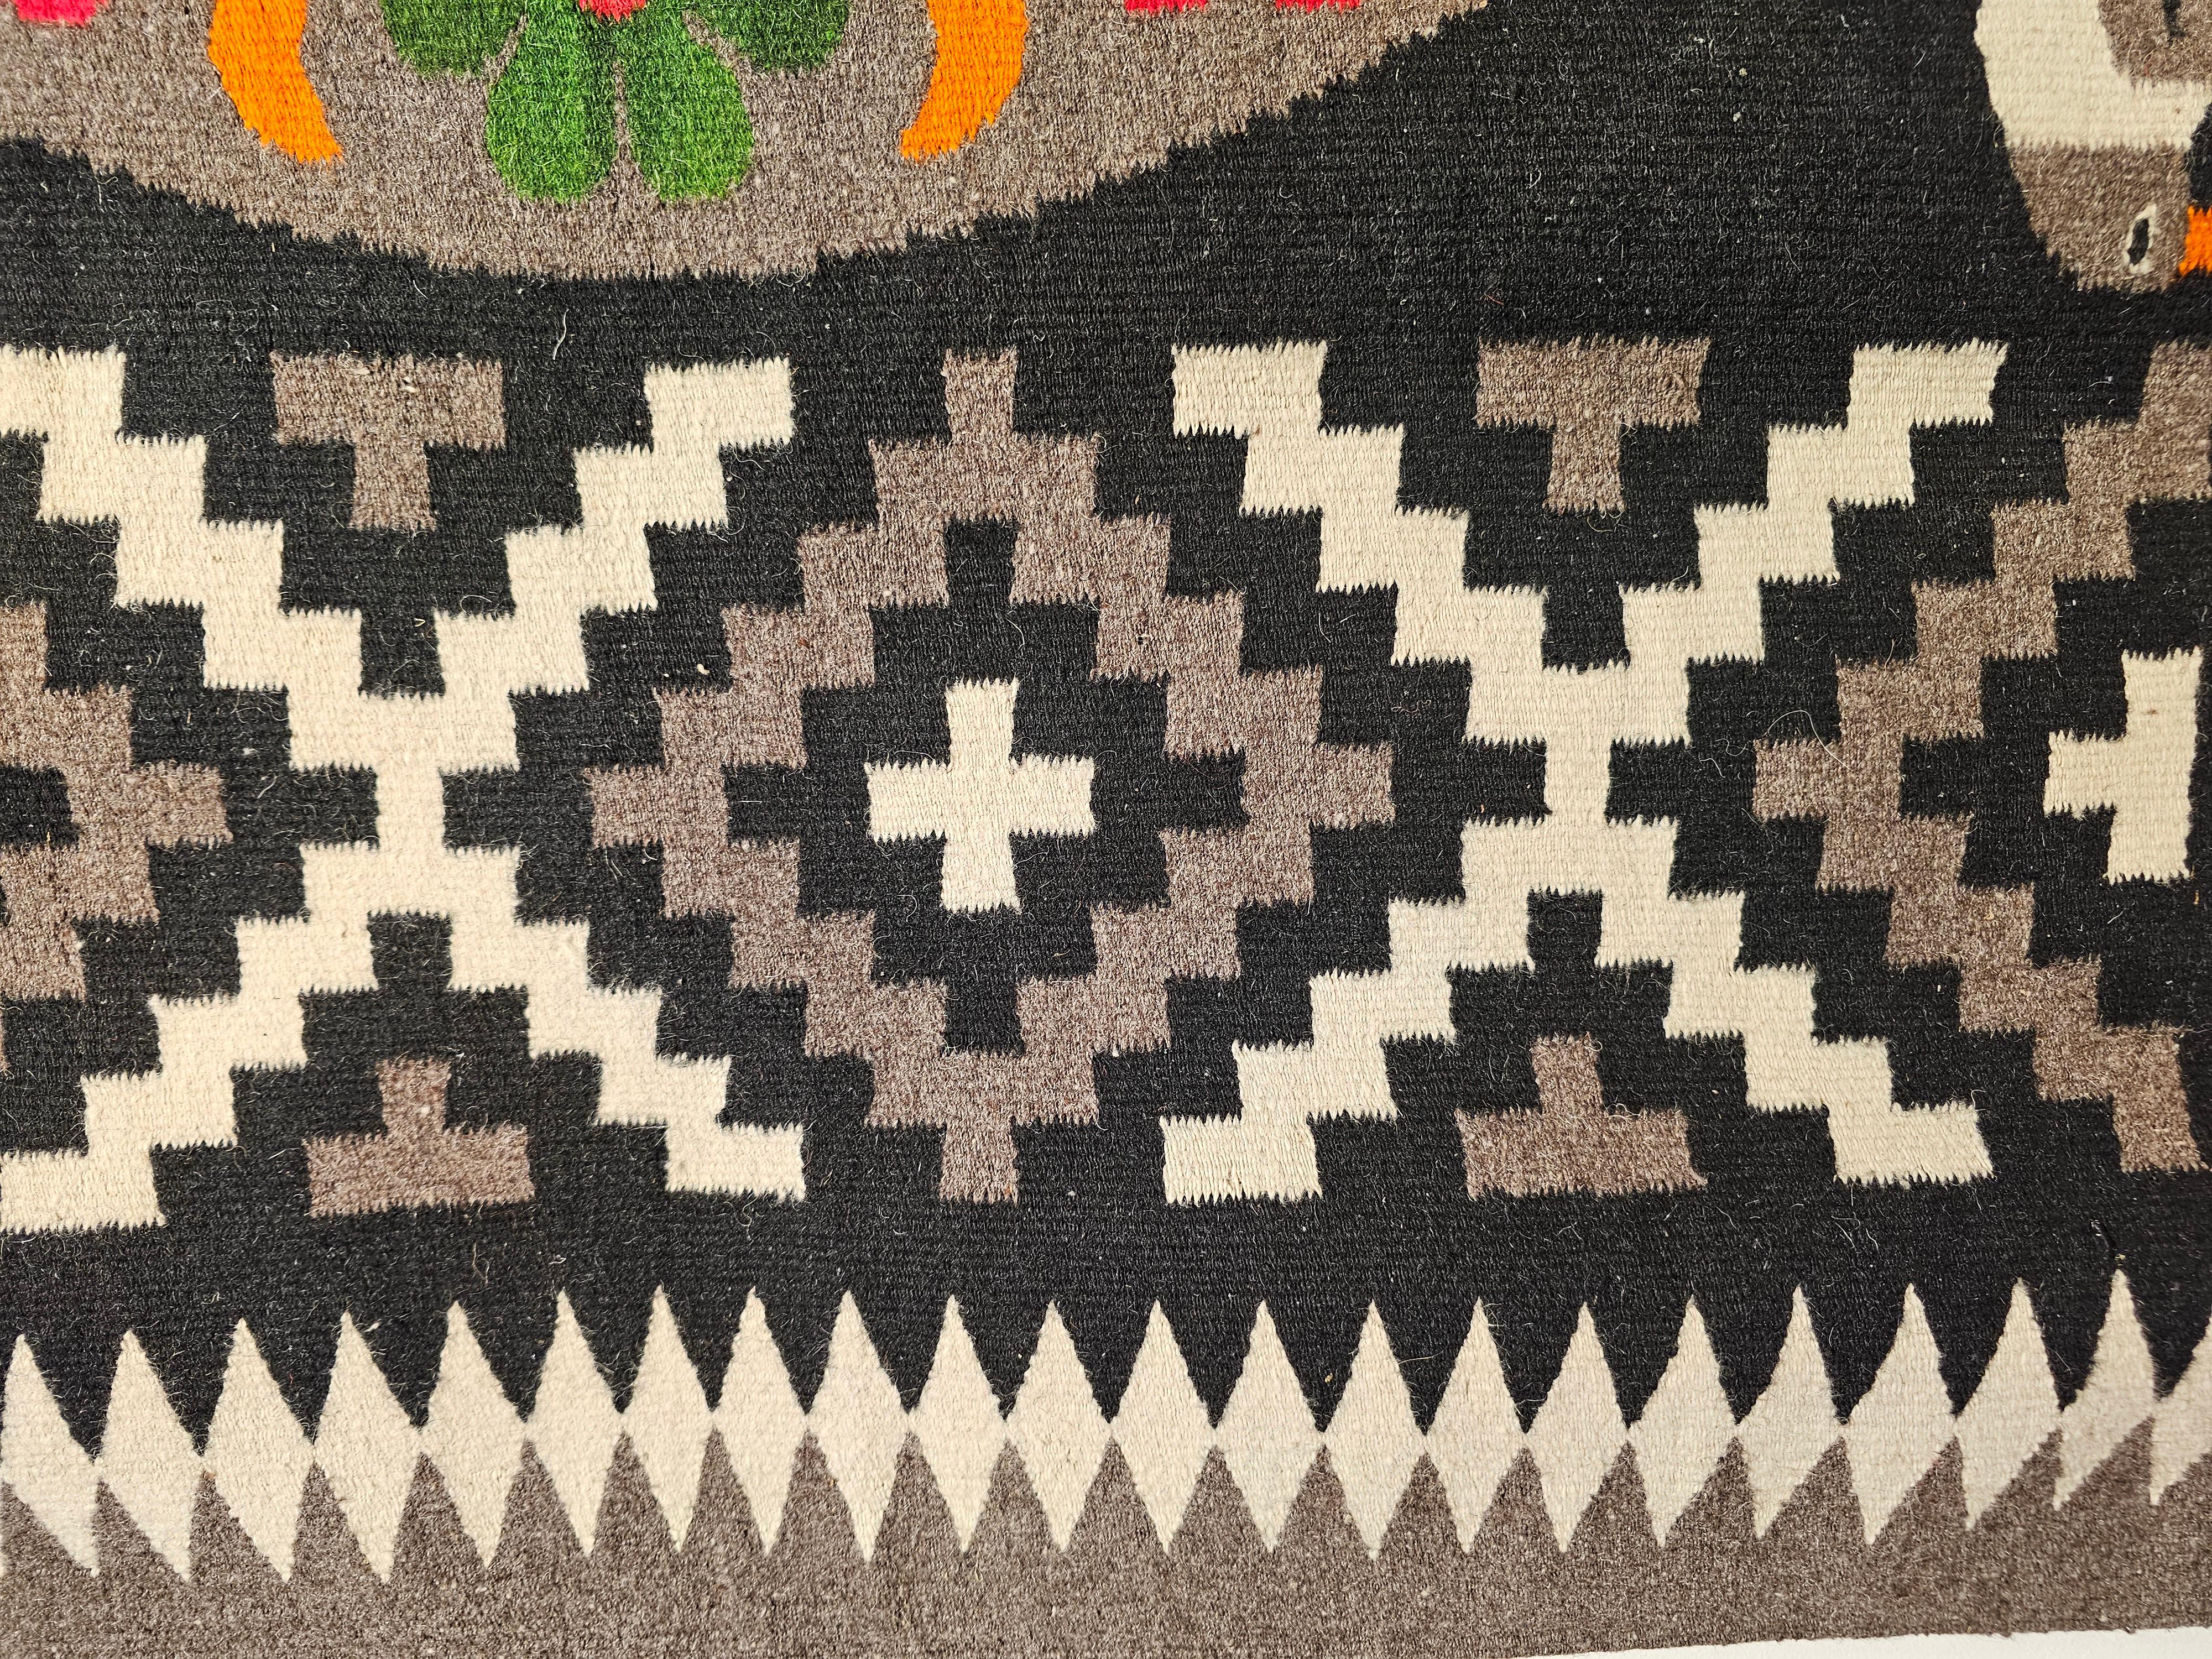 Wool Vintage Mexican Serape Kilim Rug in Gray, Black and Ivory Colors For Sale